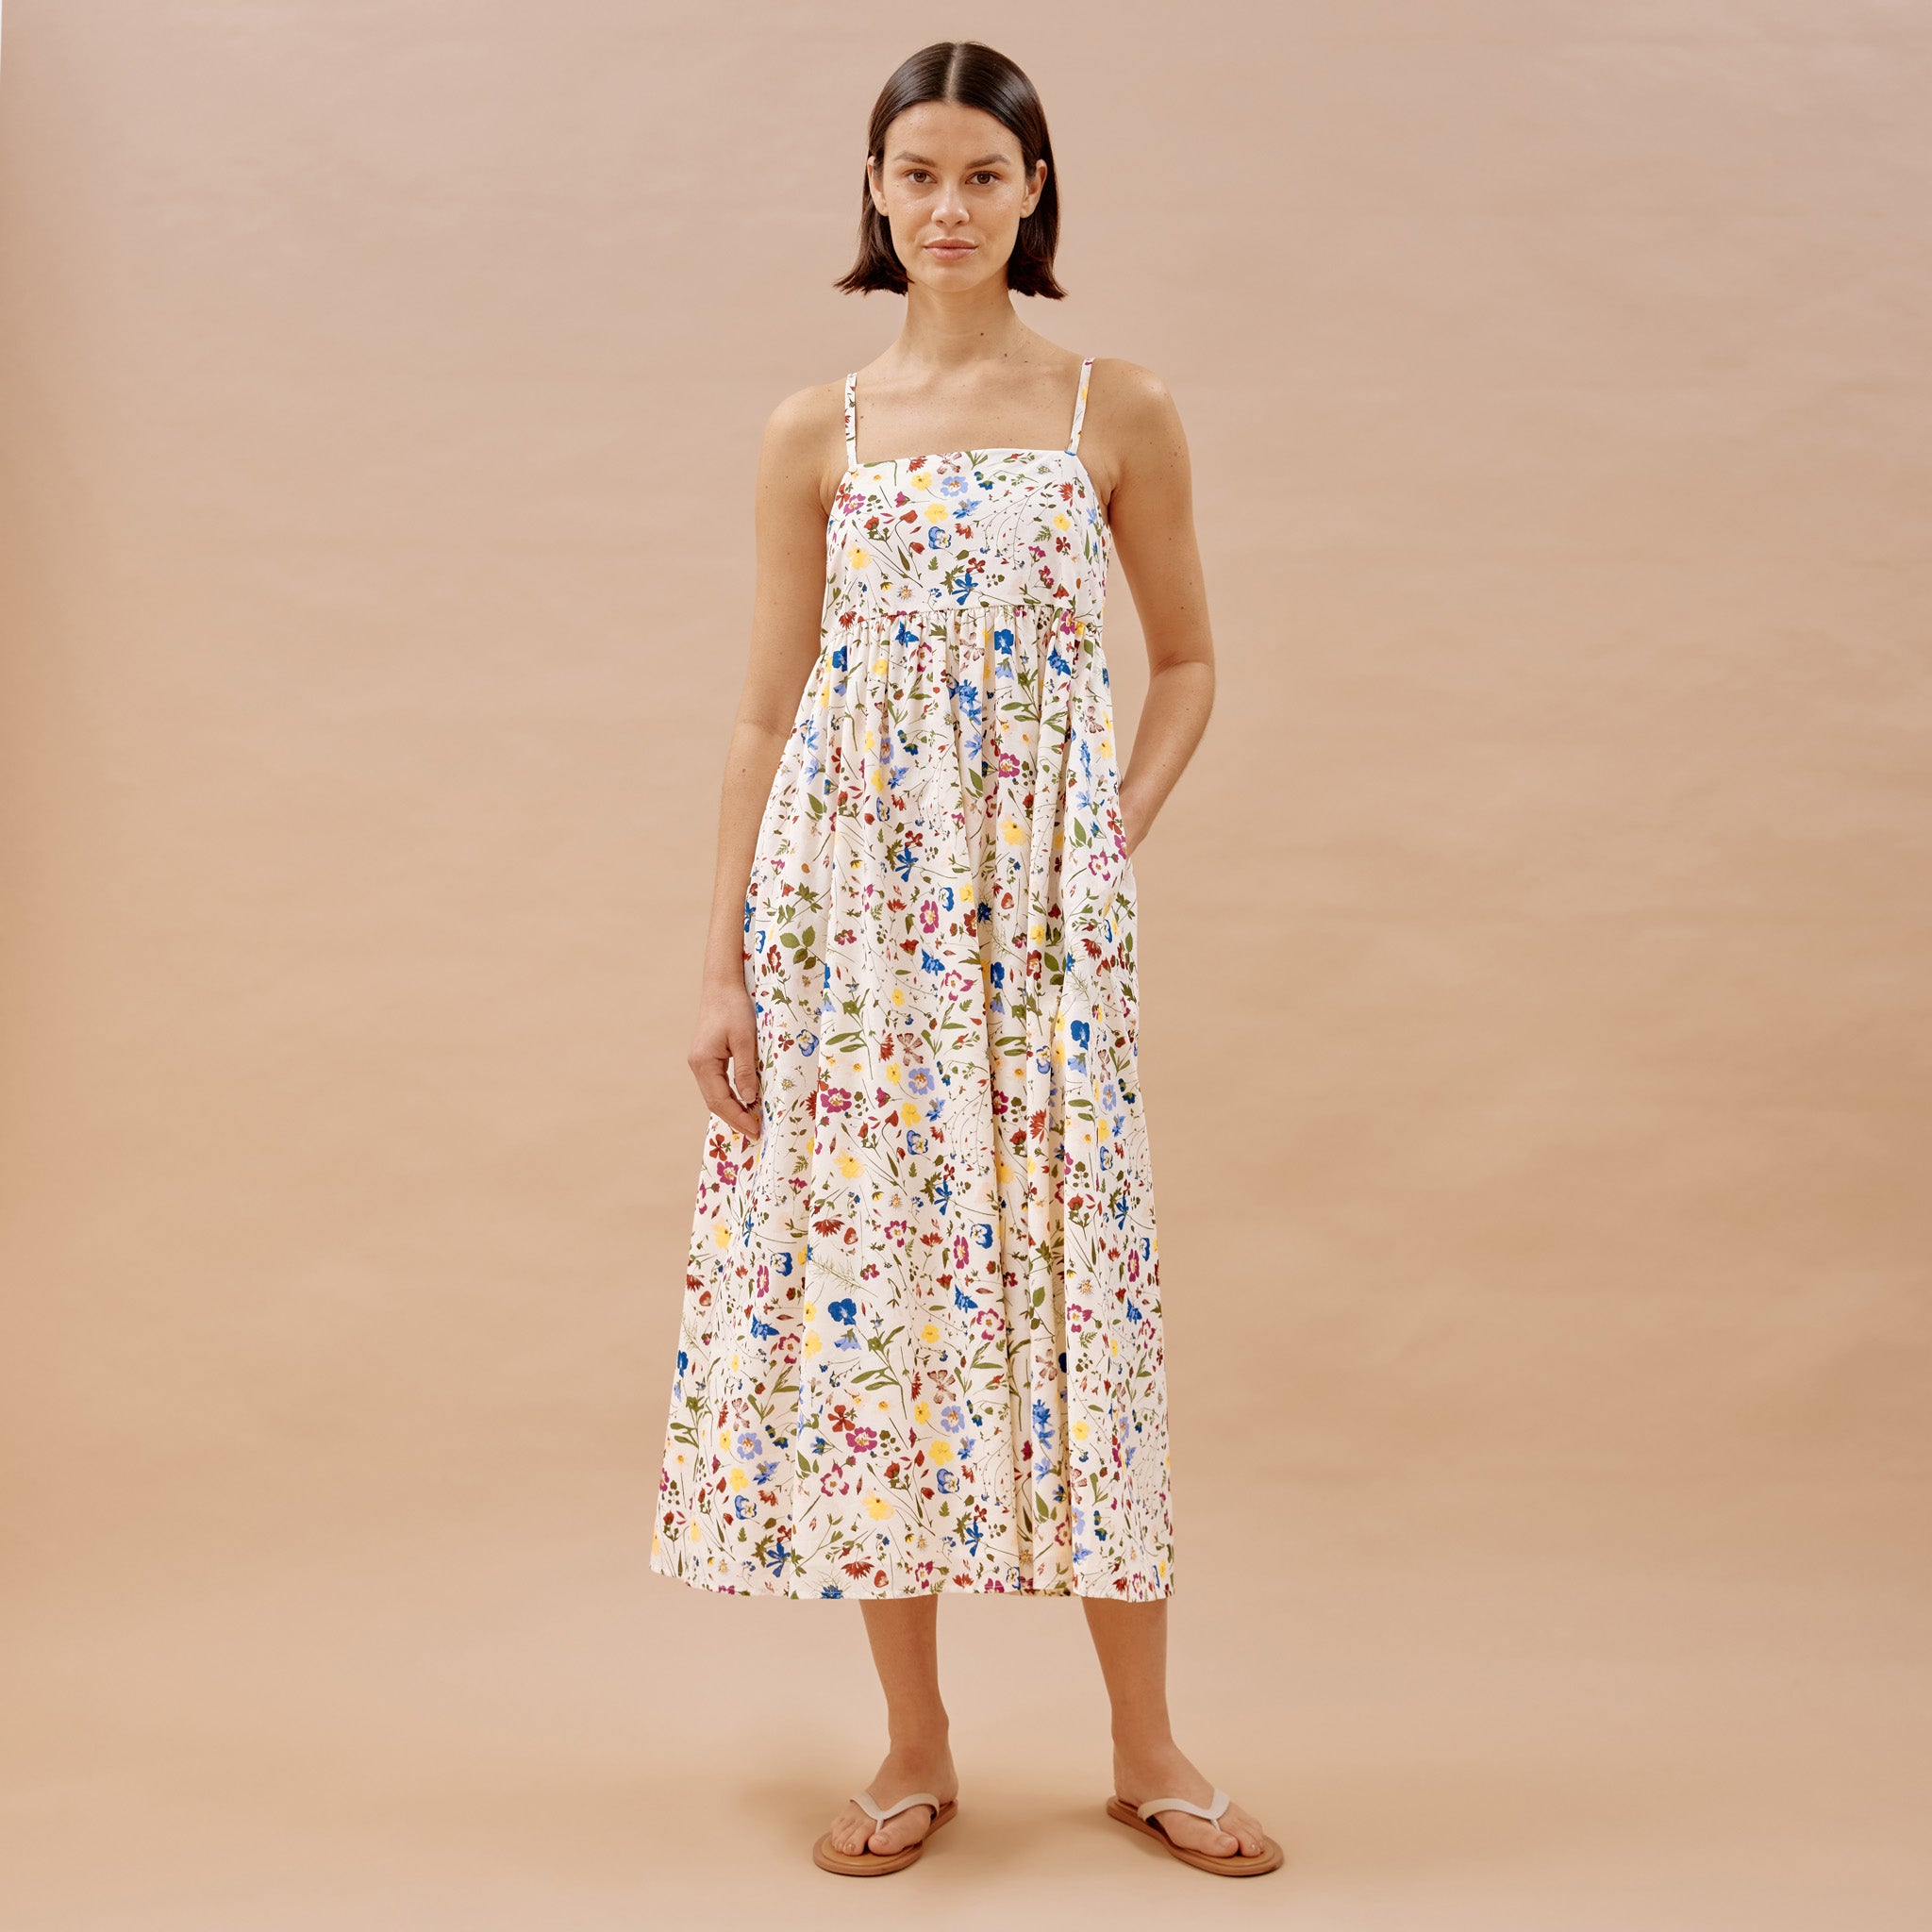 Buttercup Pressed Floral Sundress